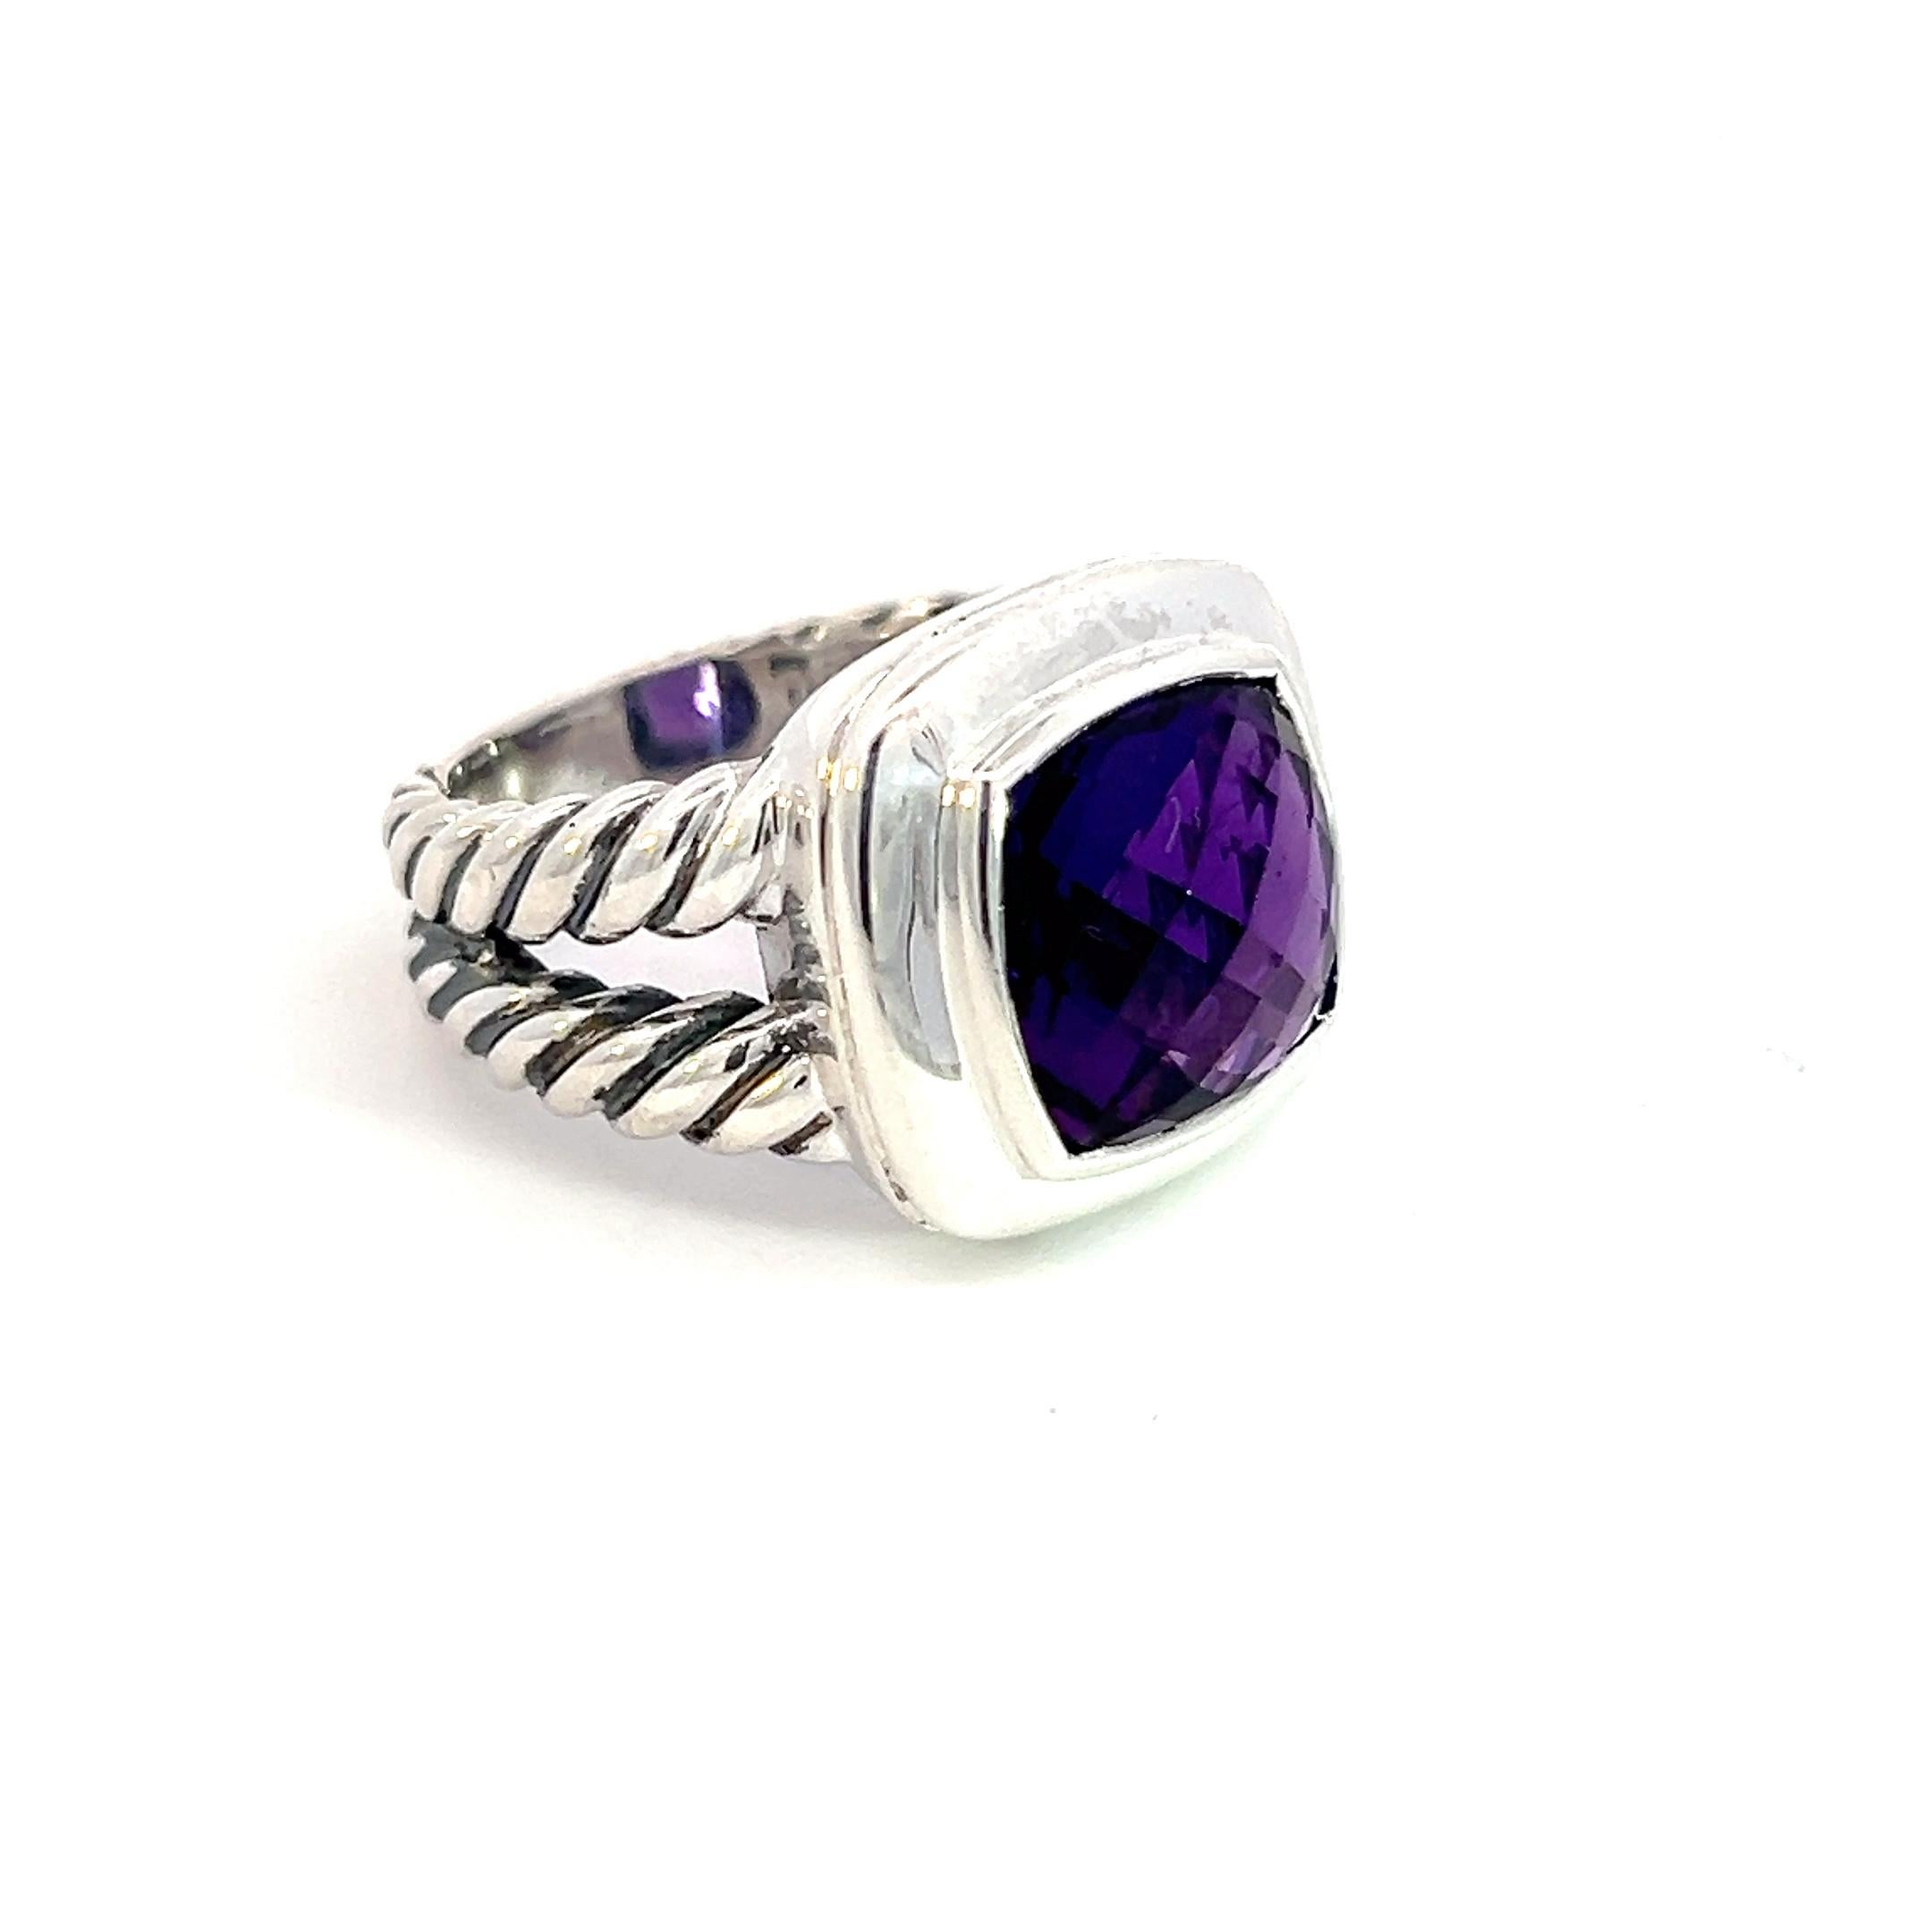 Authentic David Yurman Estate Amethyst Albion Ring 6 Silver 11 mm DY363

Retail: $590

Ring from ALBION COLLECTION

This elegant Authentic David Yurman ring is made of sterling silver.

TRUSTED SELLER SINCE 2002

PLEASE SEE OUR HUNDREDS OF POSITIVE